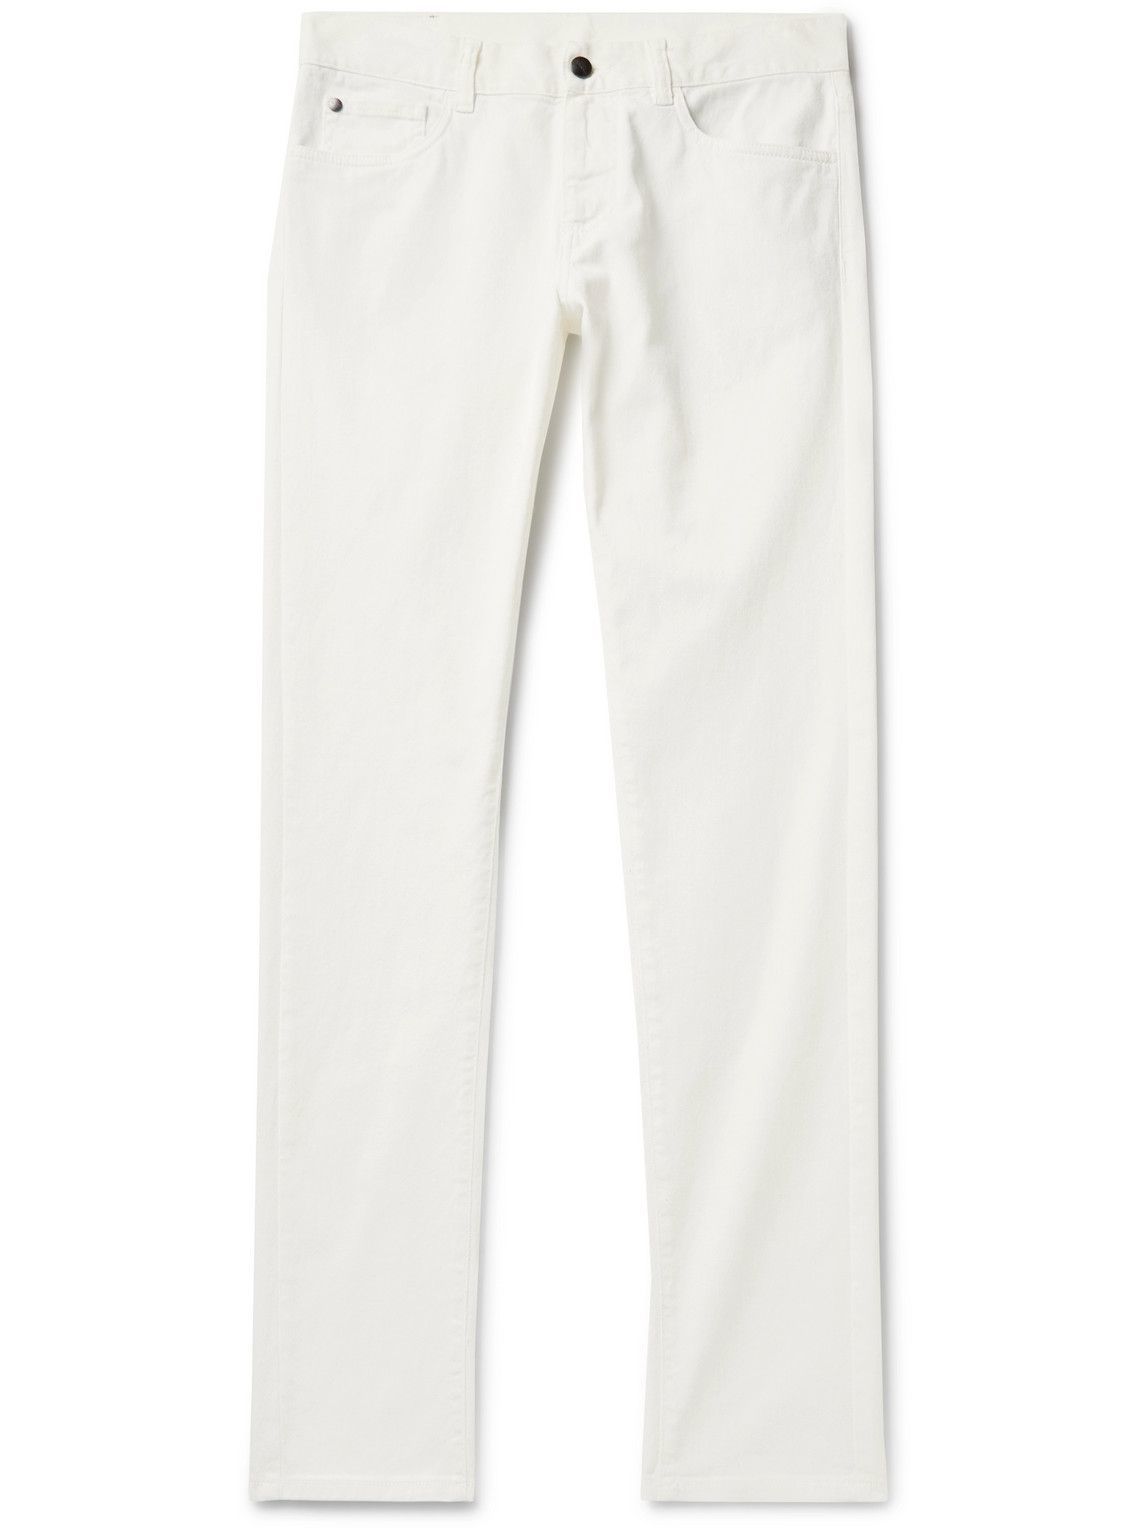 Canali - Slim-Fit Jeans - White Canali